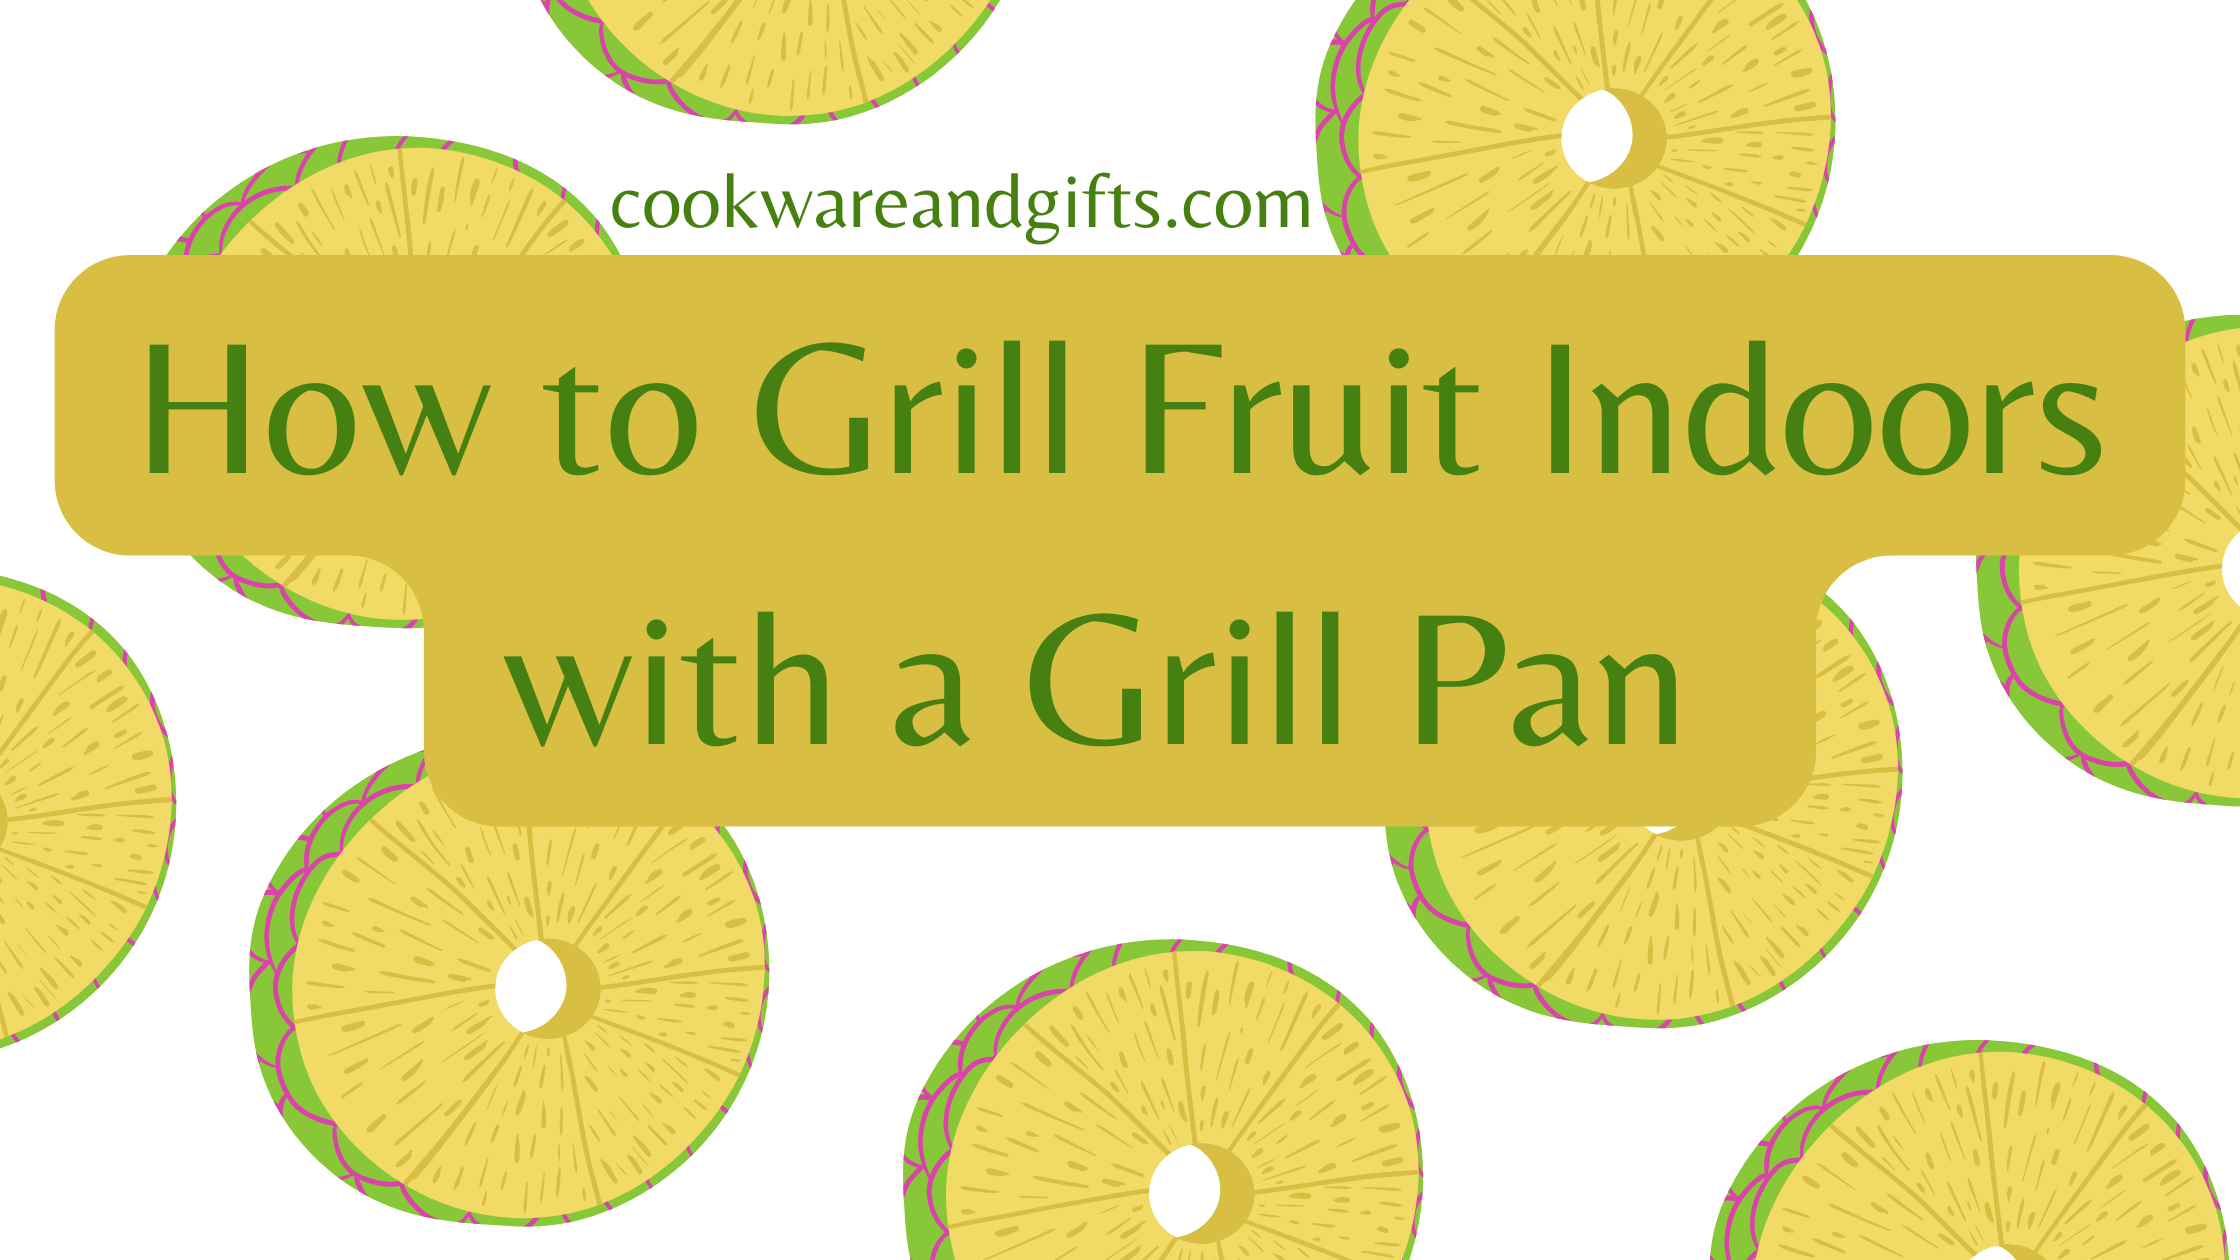 How to Grill Fruit Indoors with a Grill Pan